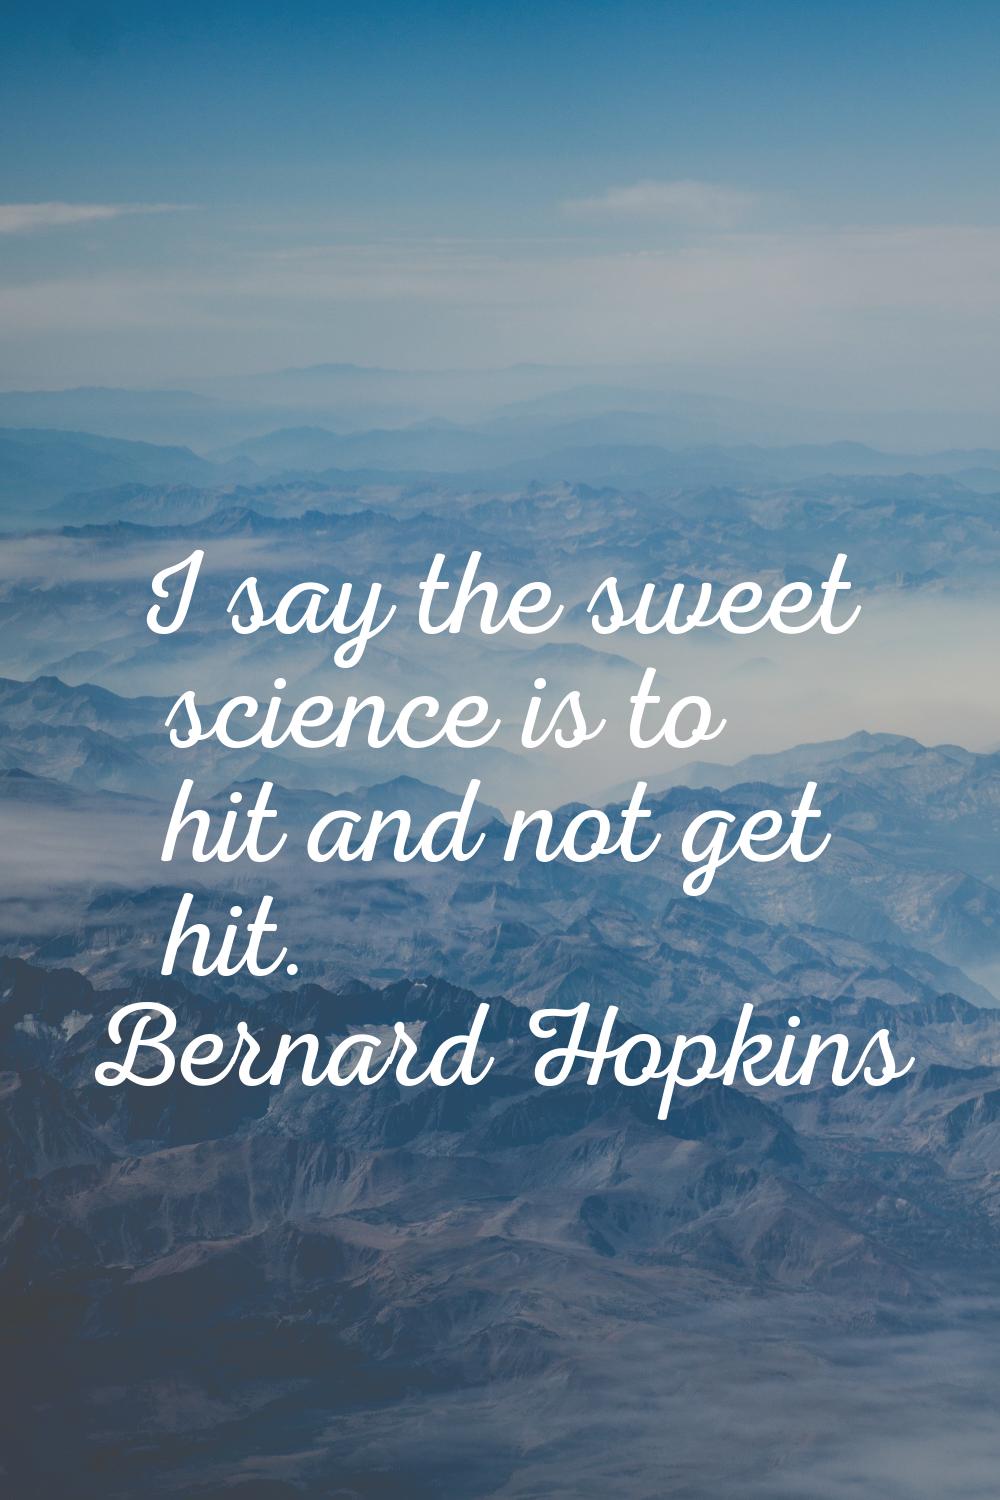 I say the sweet science is to hit and not get hit.